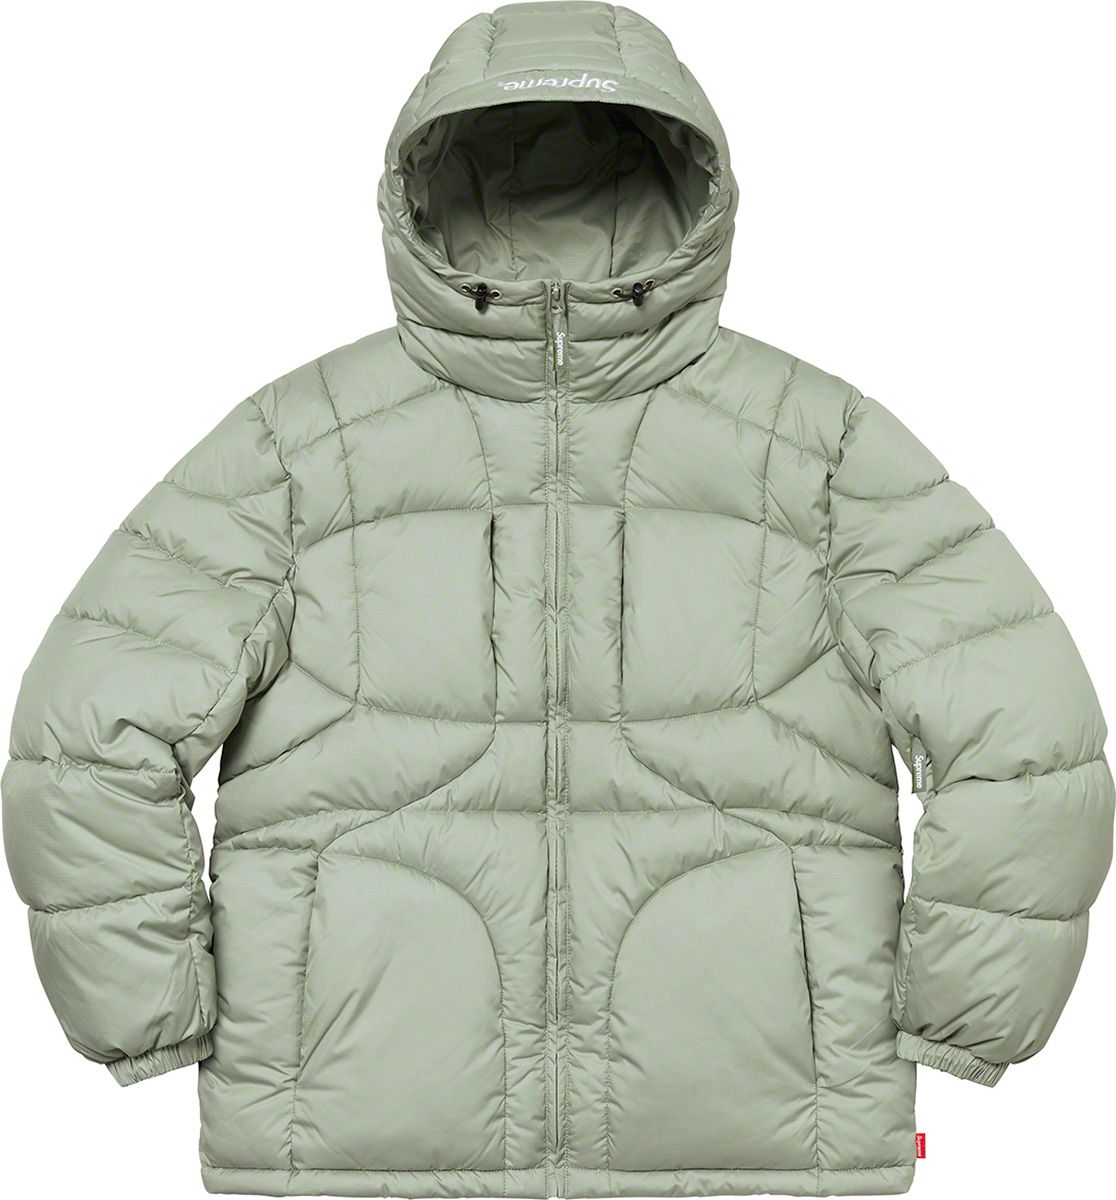 Warp Hooded Puffy Jacket - Fall/Winter 2021 Preview – Supreme